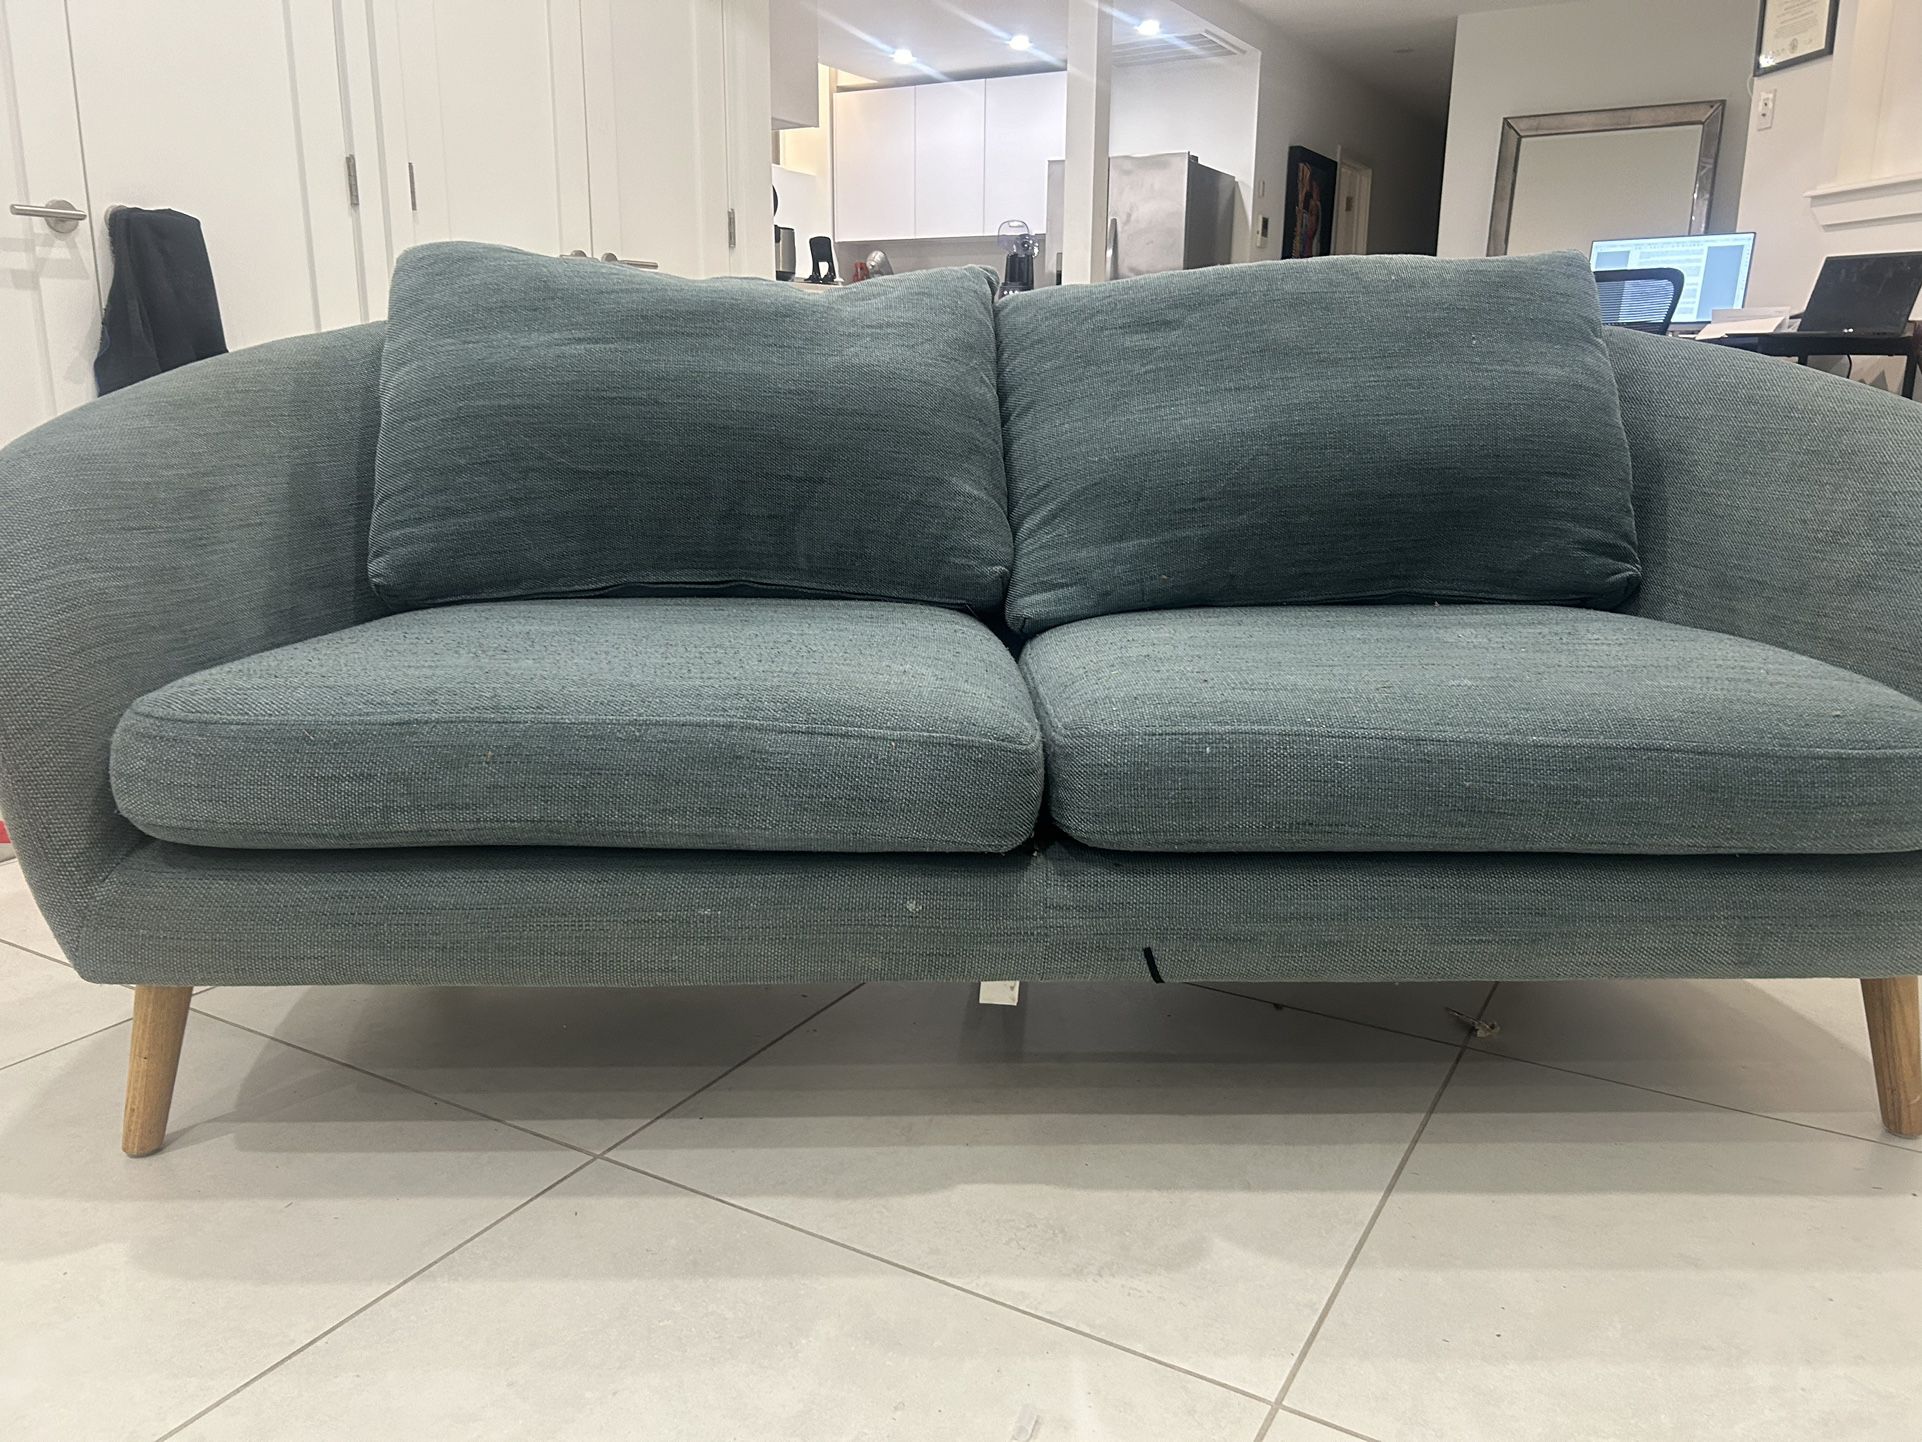 West Elm Love Seat with removable slip cover